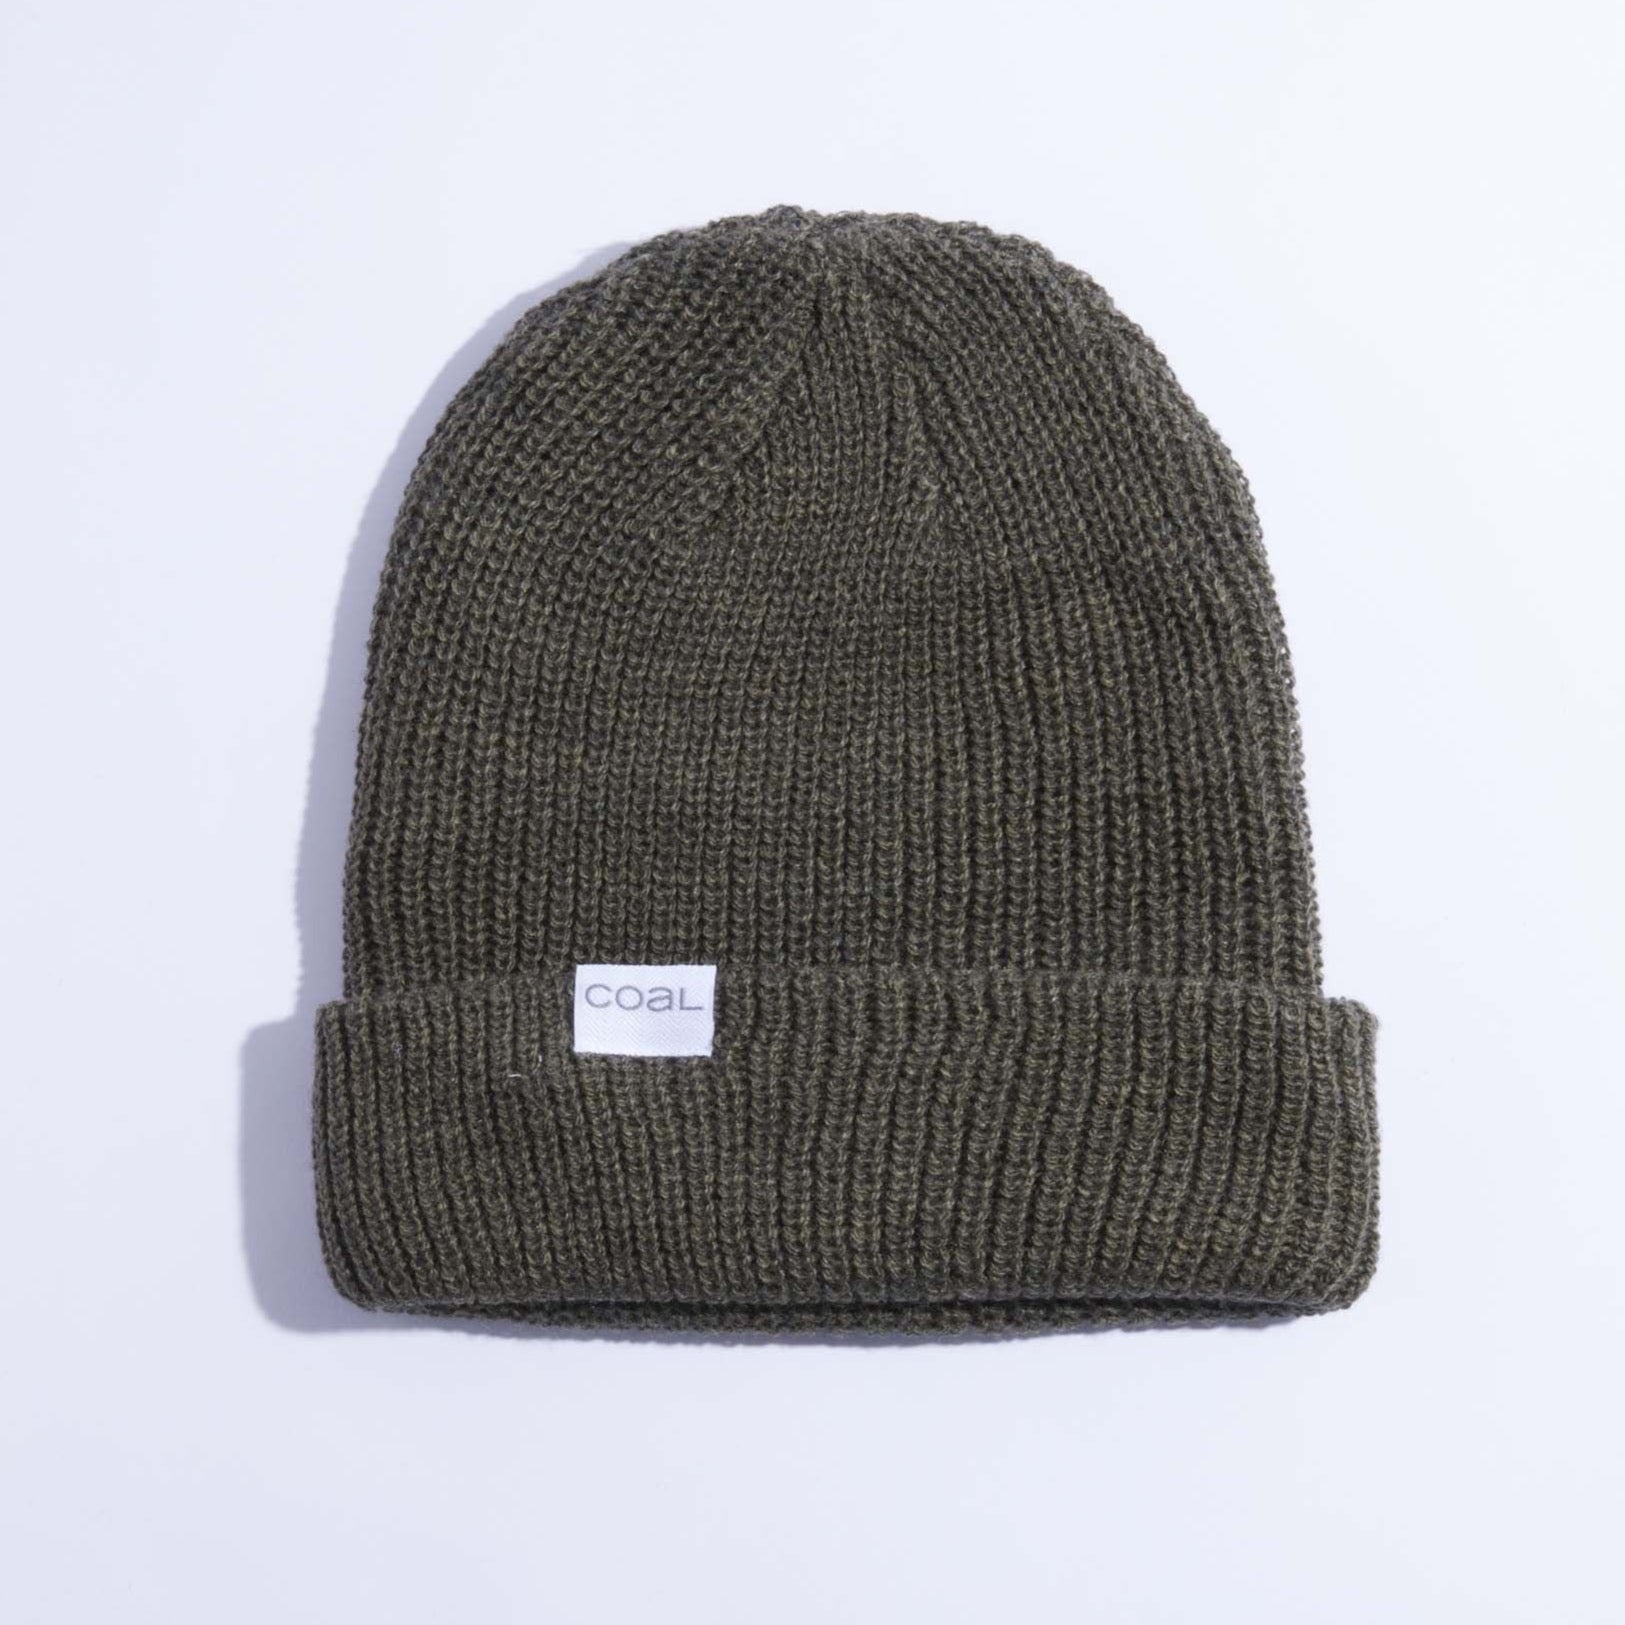 The Stanley Olive Coal Cuff Beanie